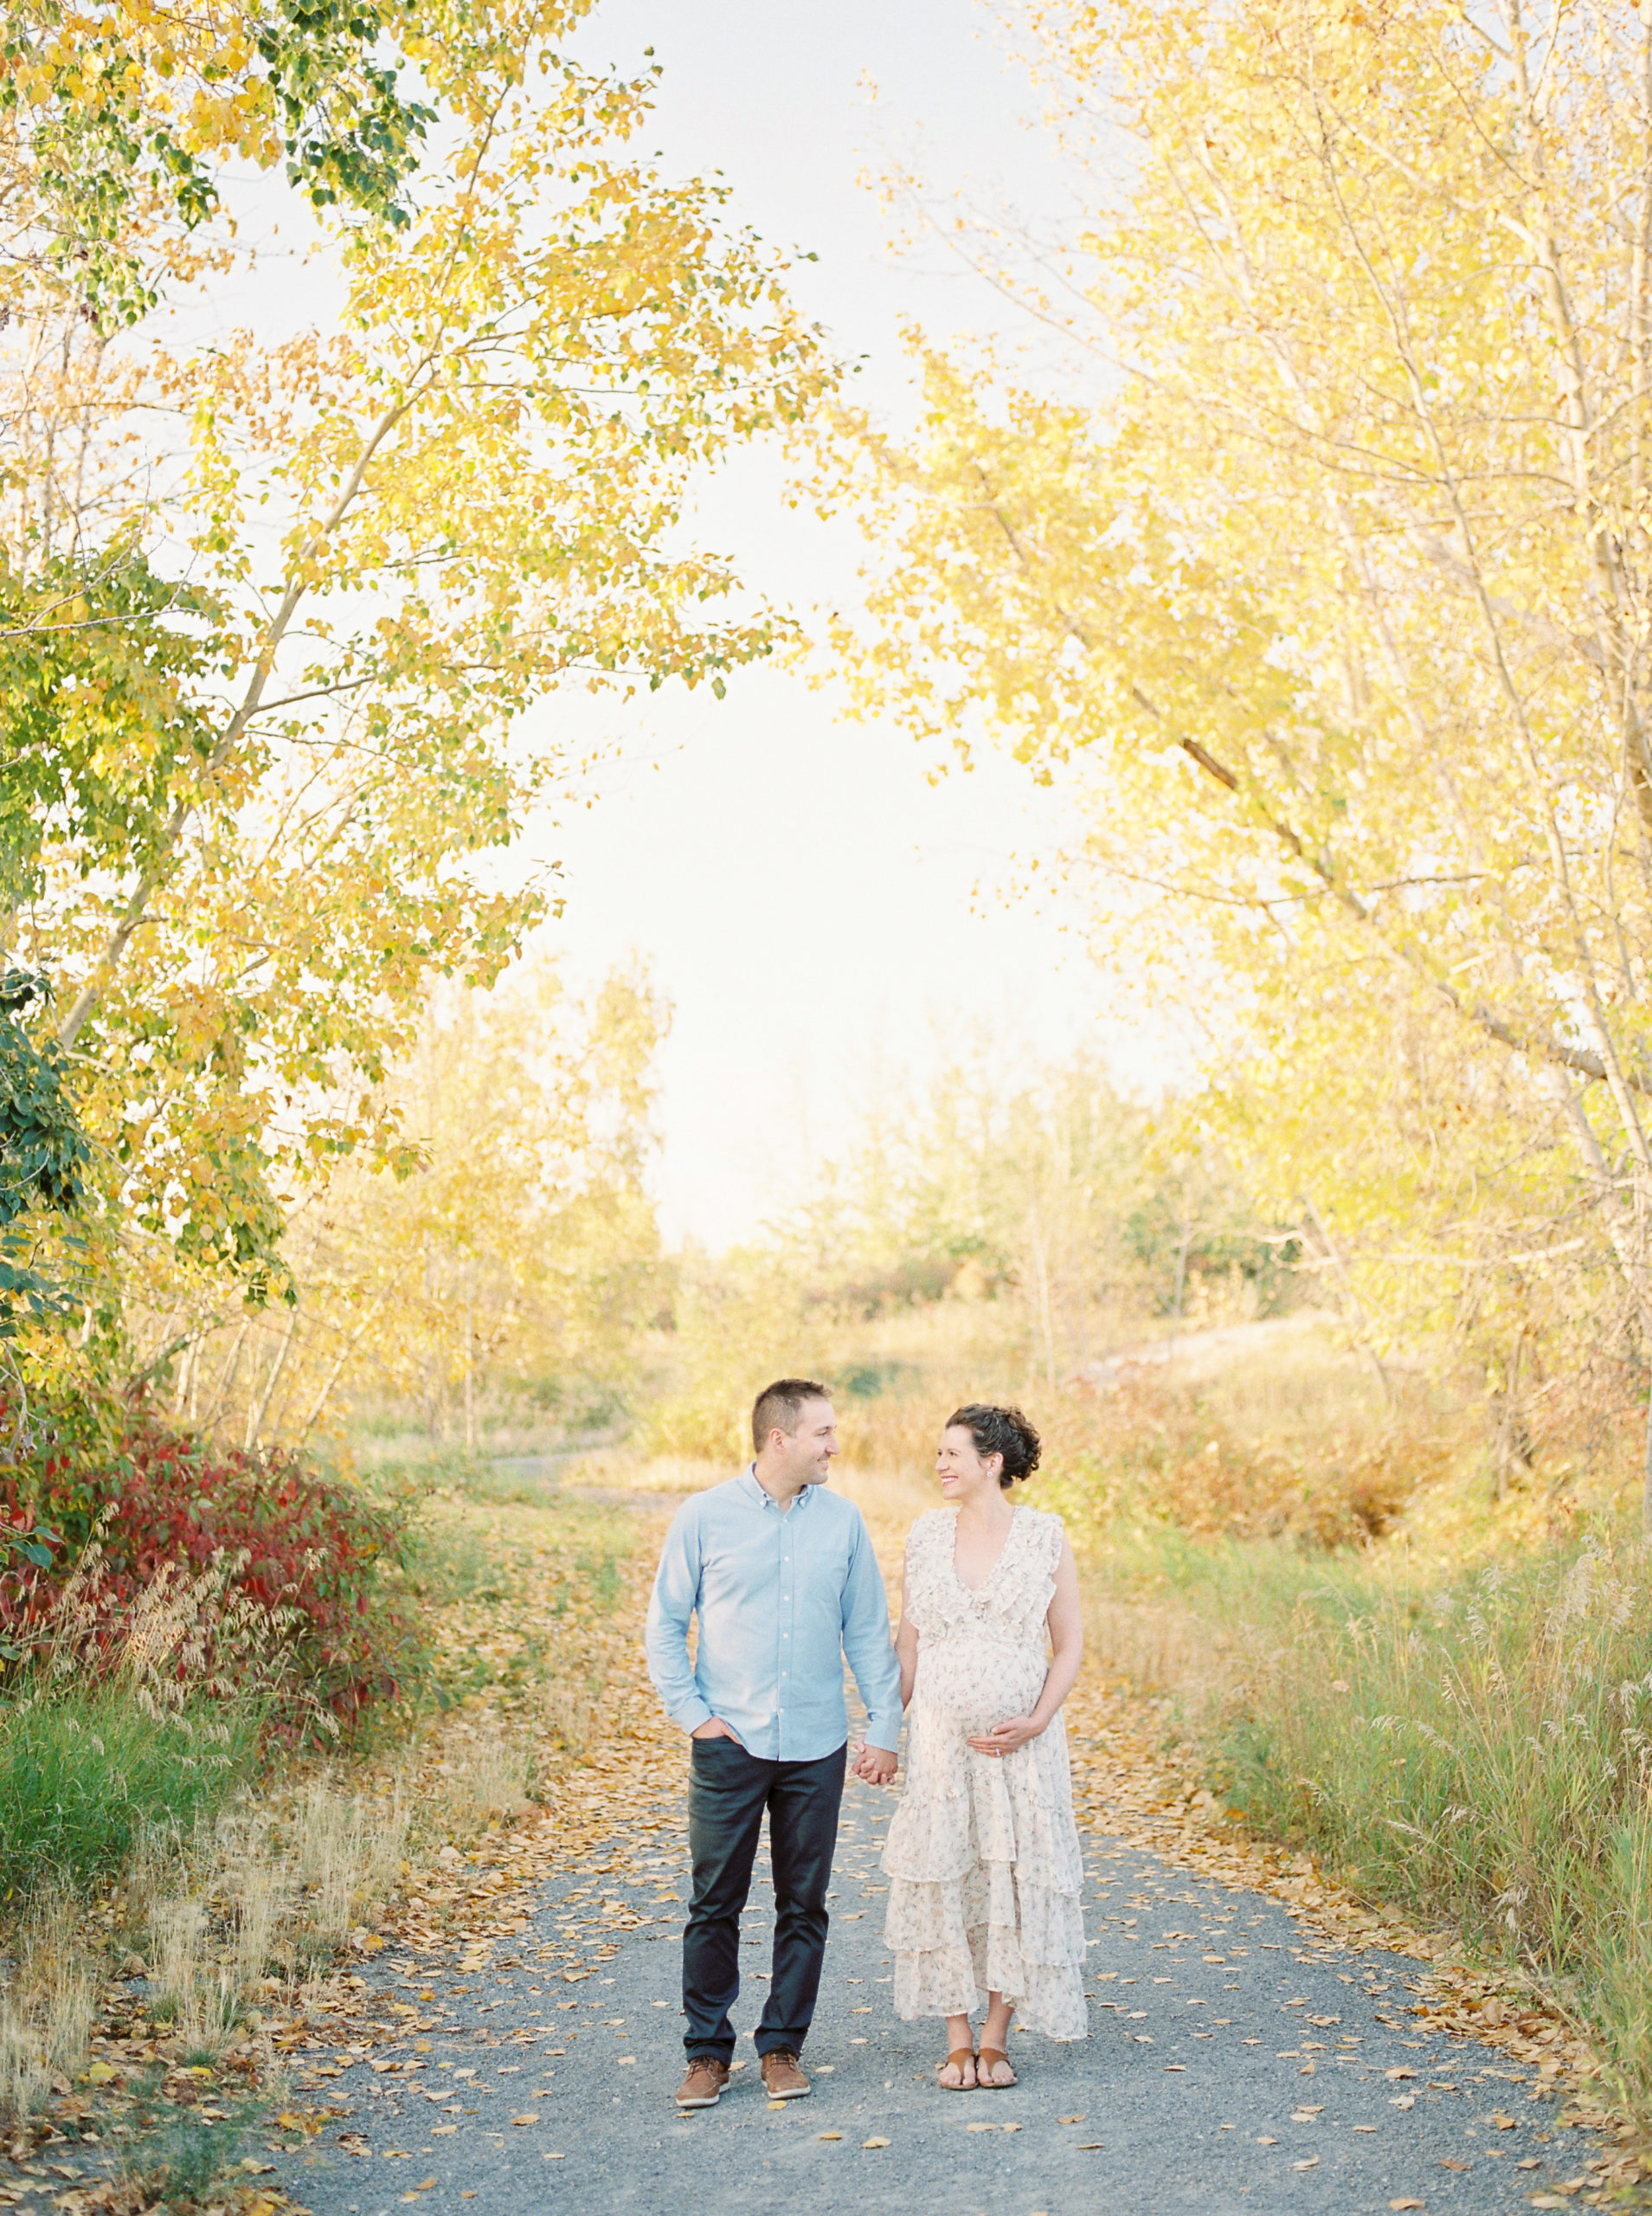 Edmonton Maternity Photographer capturing mom and dad in fall colours